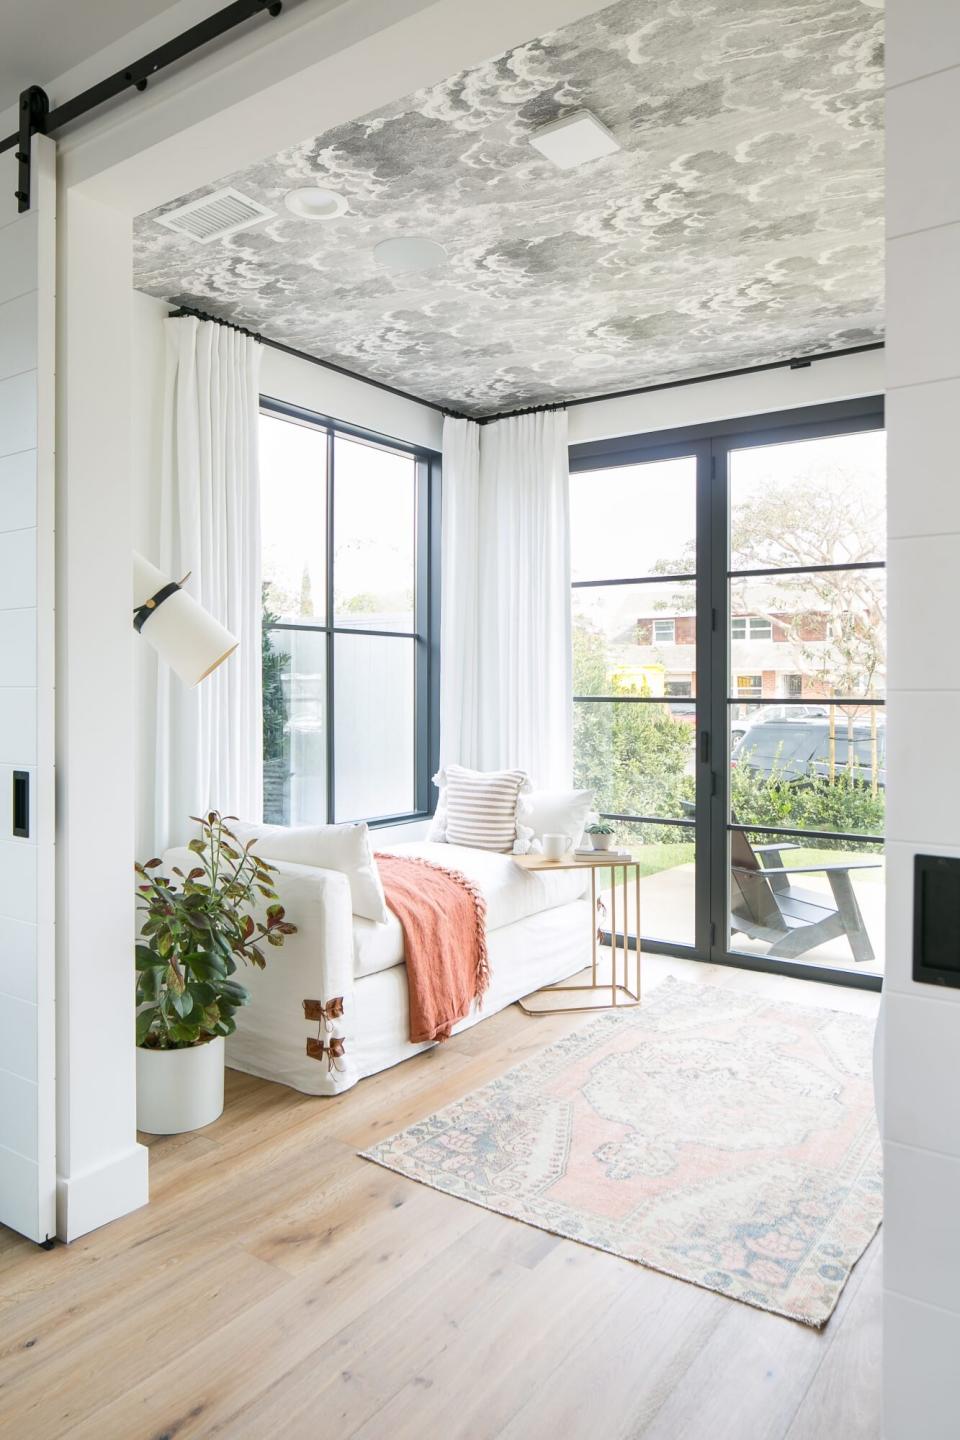 sunroom with a patterned ceiling